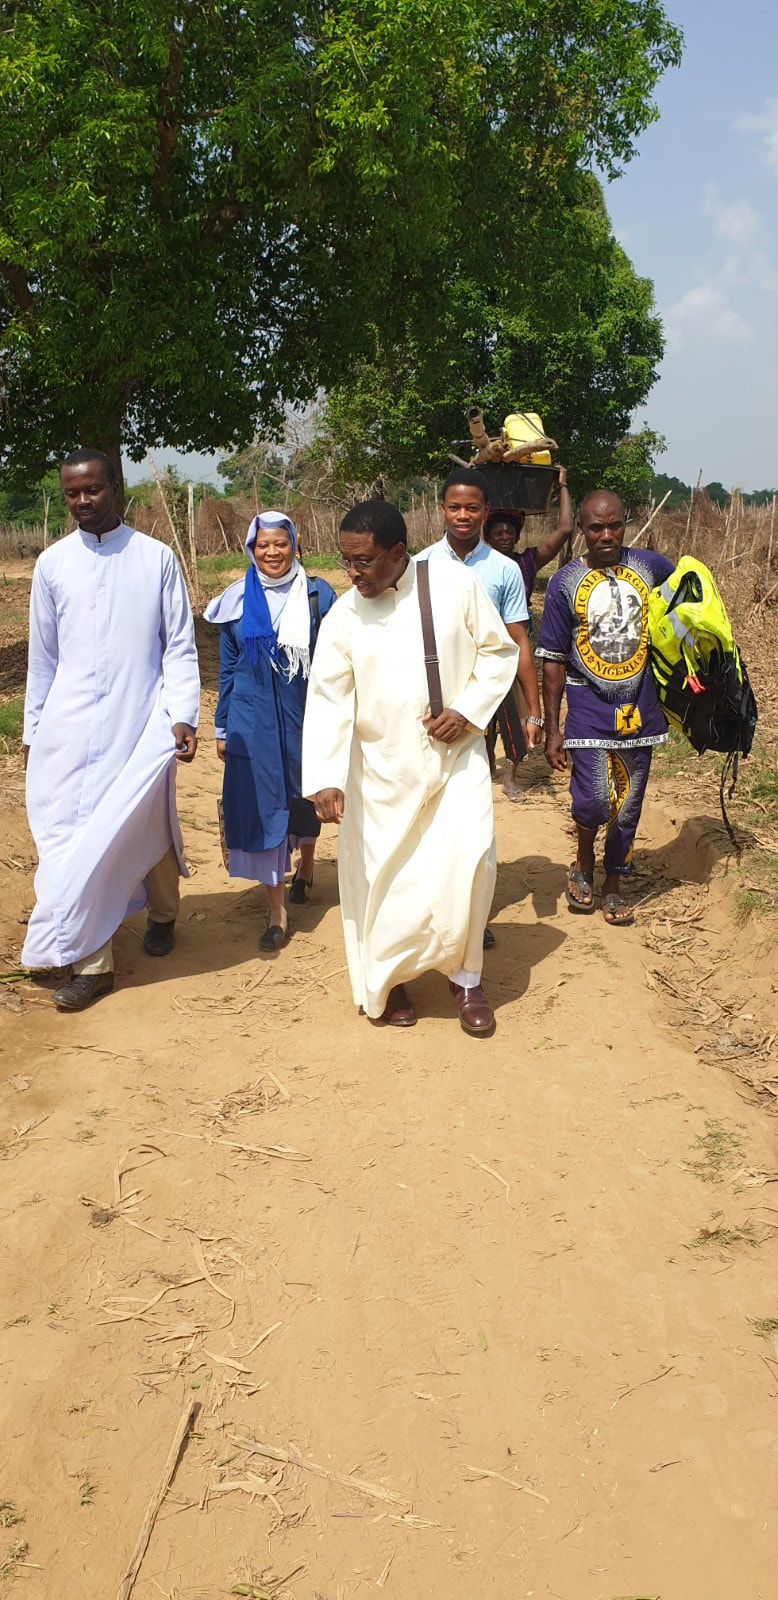 On foot trekking into Igbedor. We must take the Gospel to ends of the world!